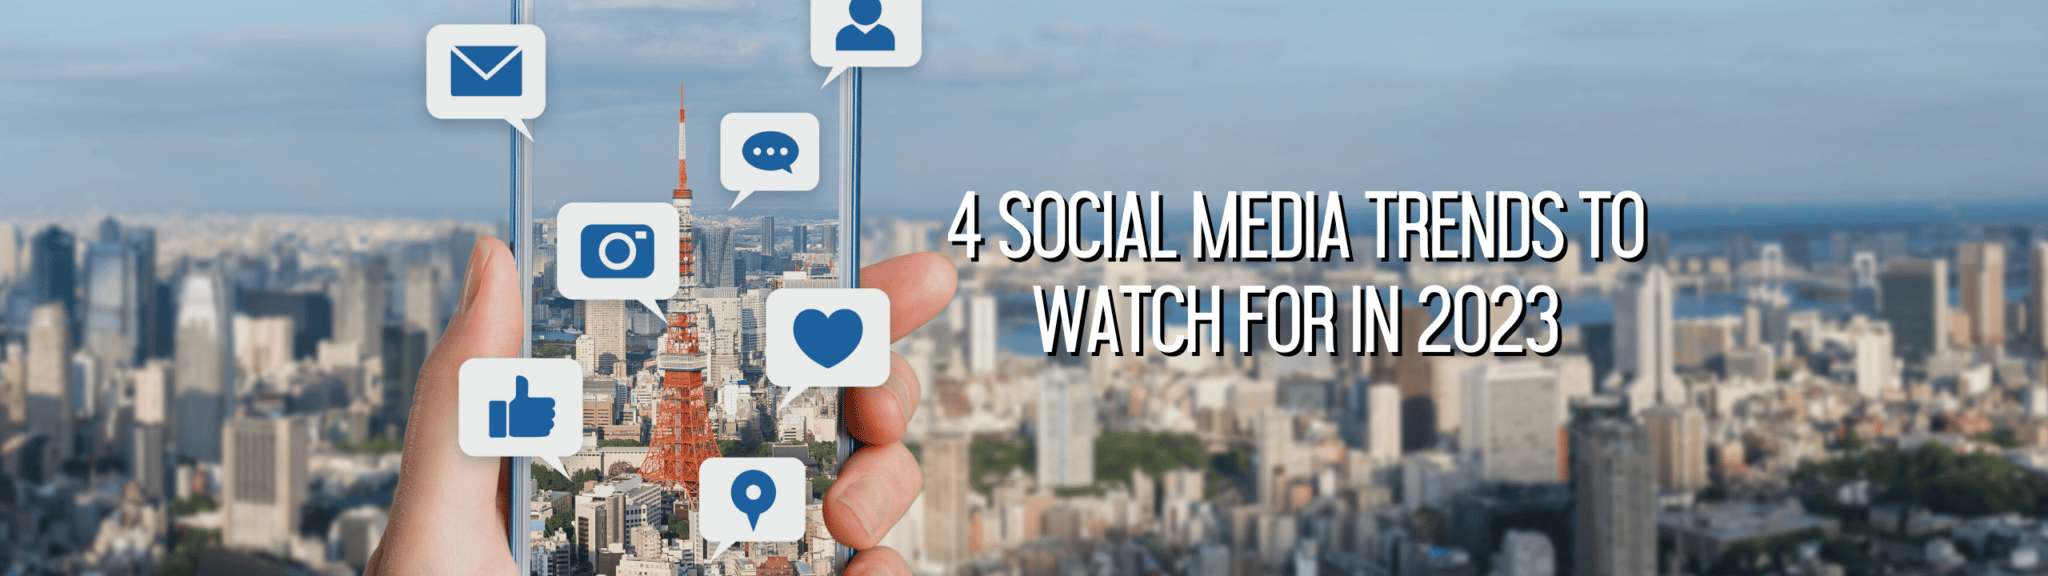 Featured image for “4 Social Media Trends To Watch For in 2023”